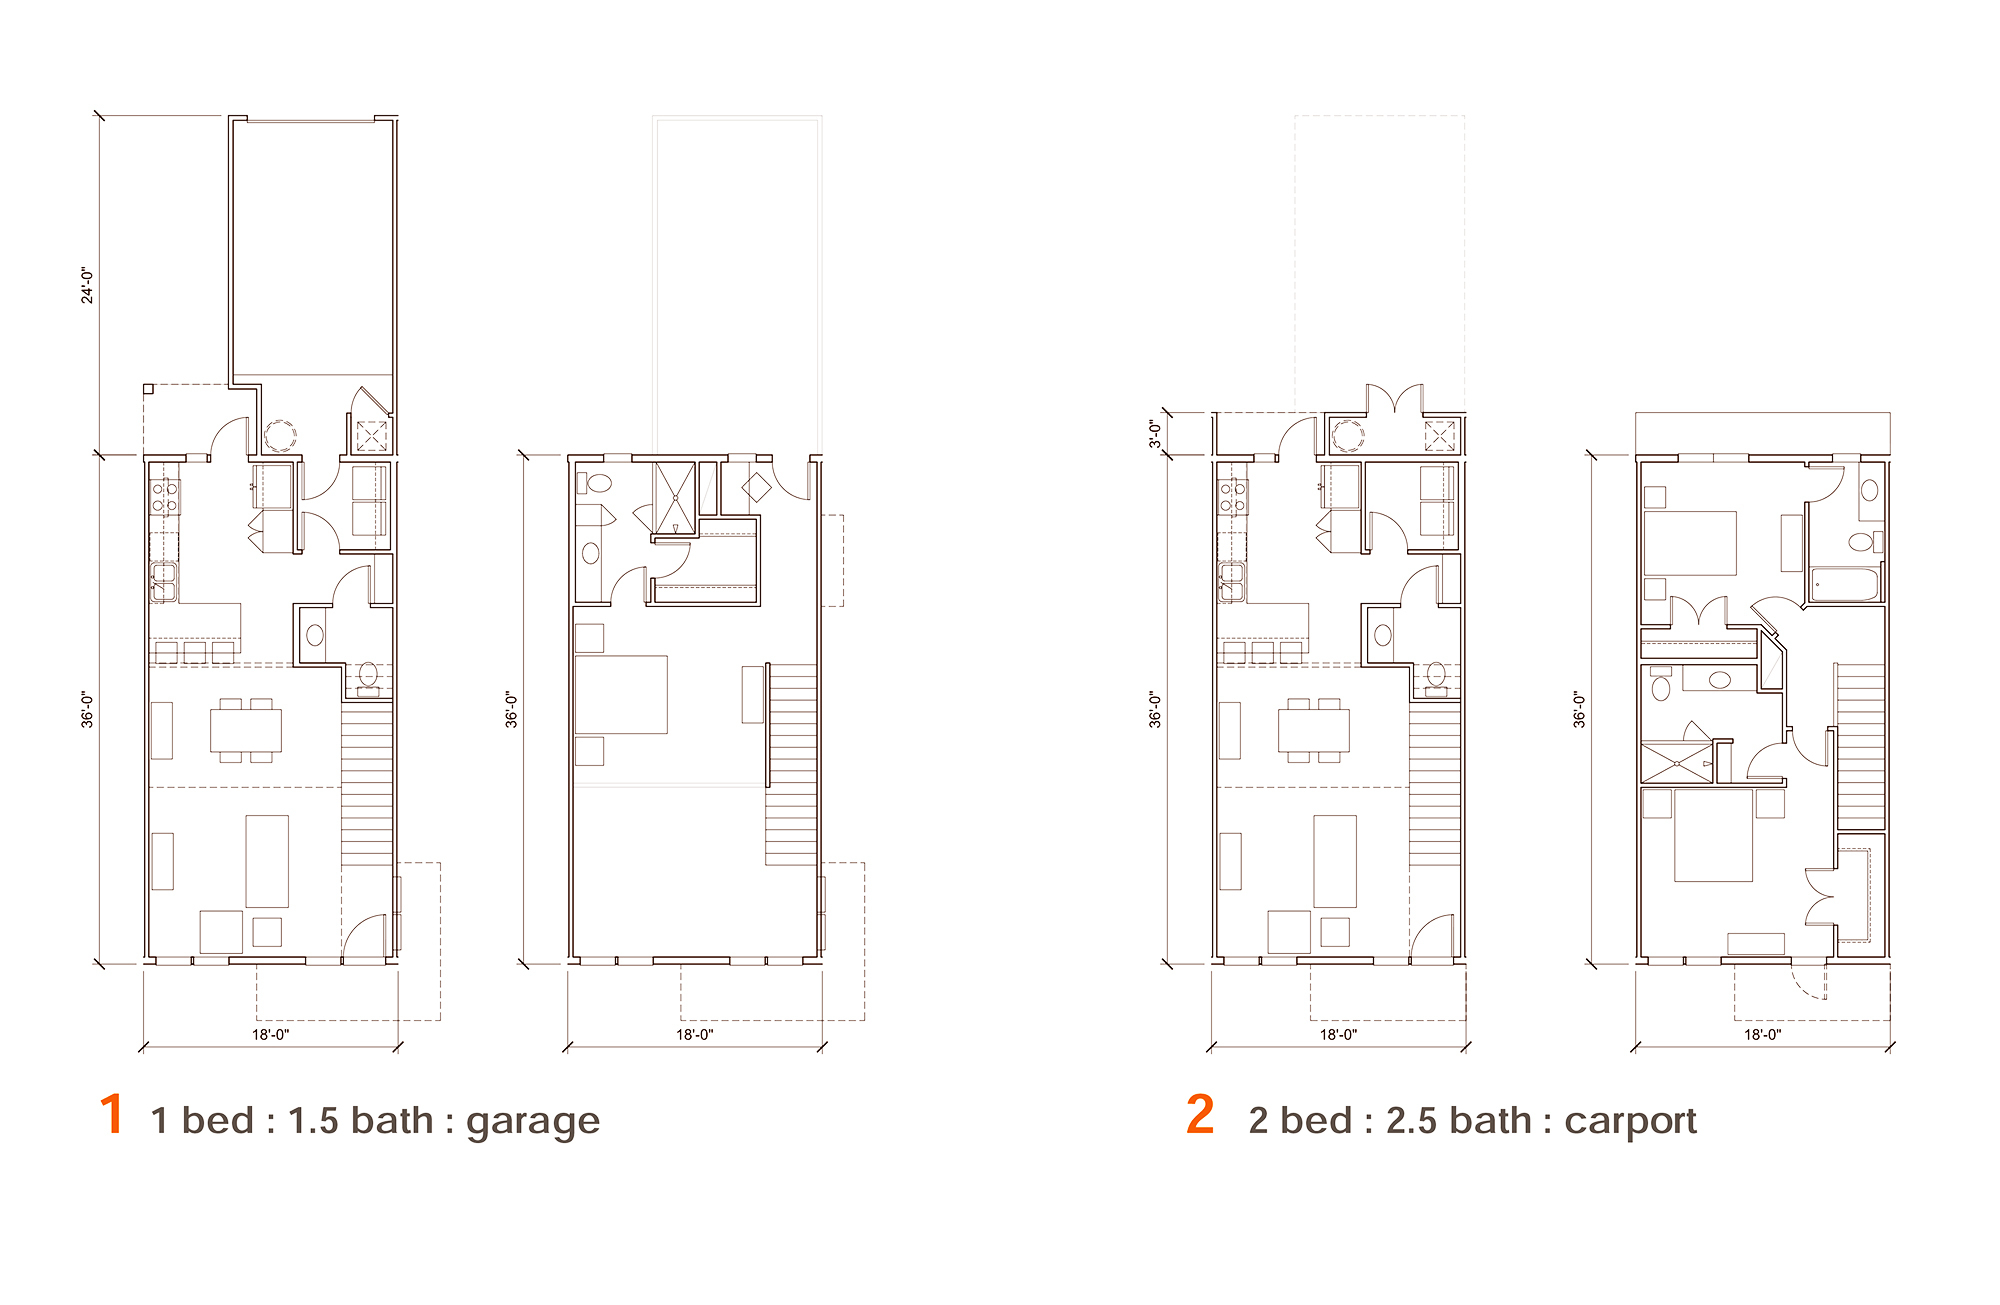 Plans show two models — a one bedroom, 1½ bath and a garage, and a two-bedroom, 2½ bath with carport.